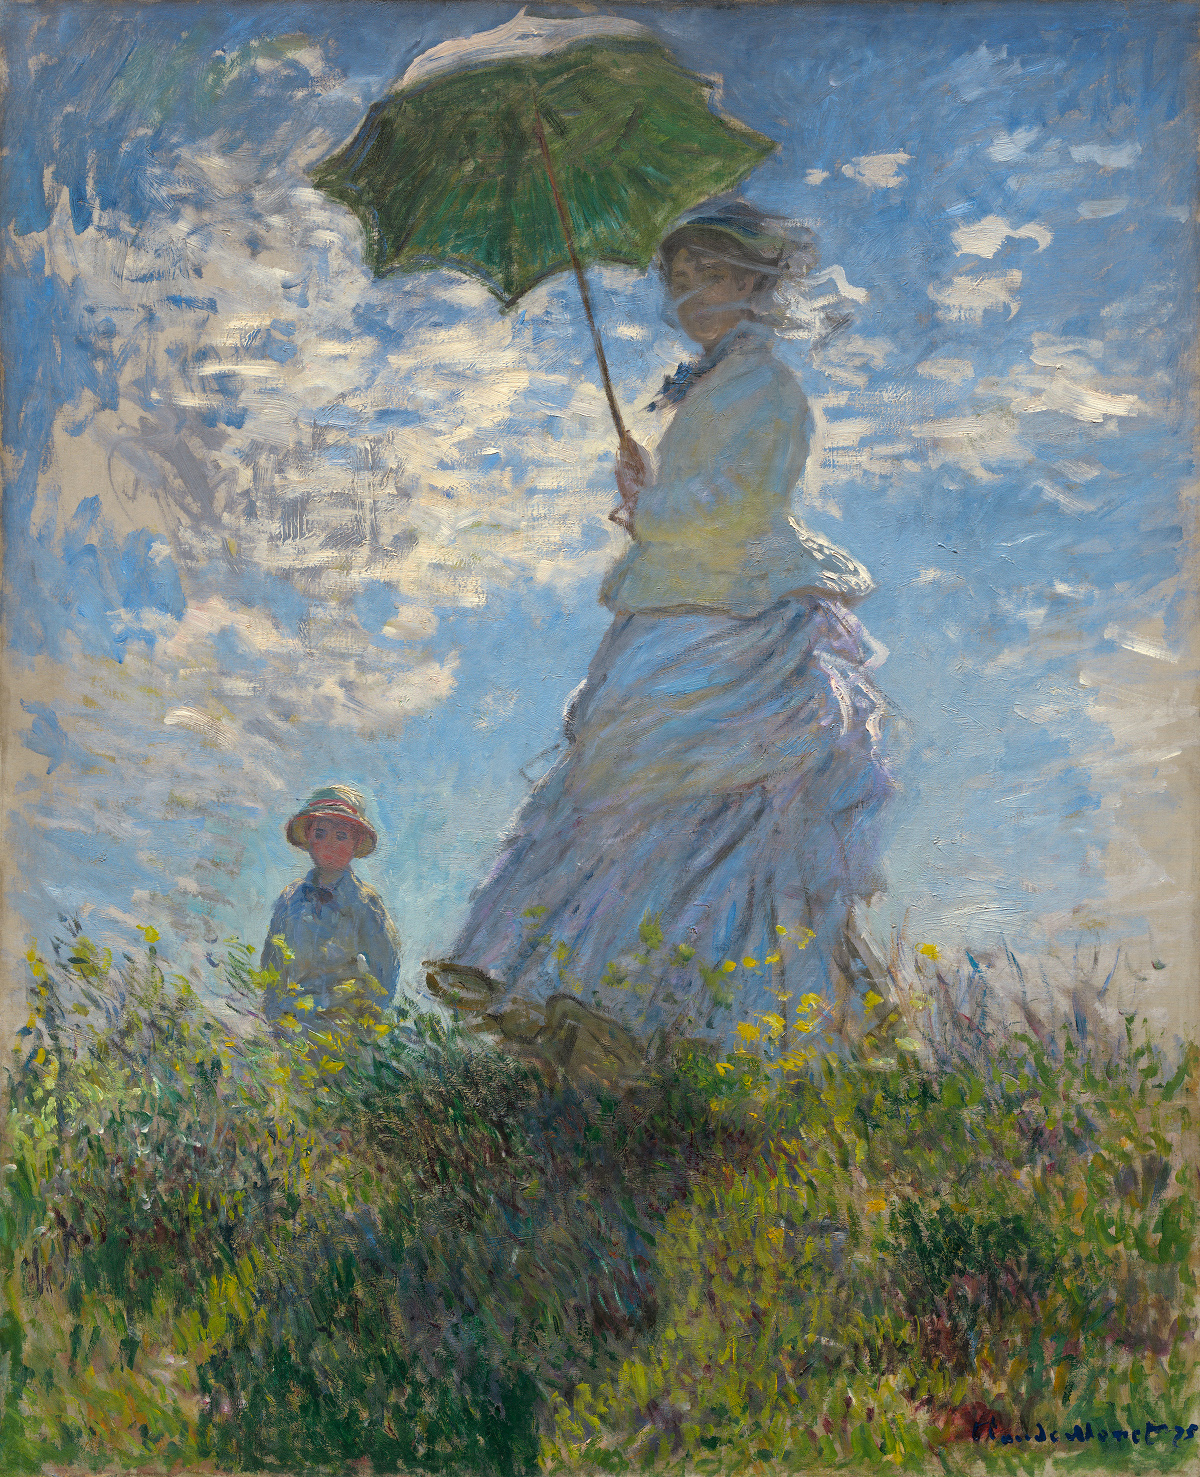 Woman with a Parasol - Madame Monet and Her Son by Claude Monet, 1875